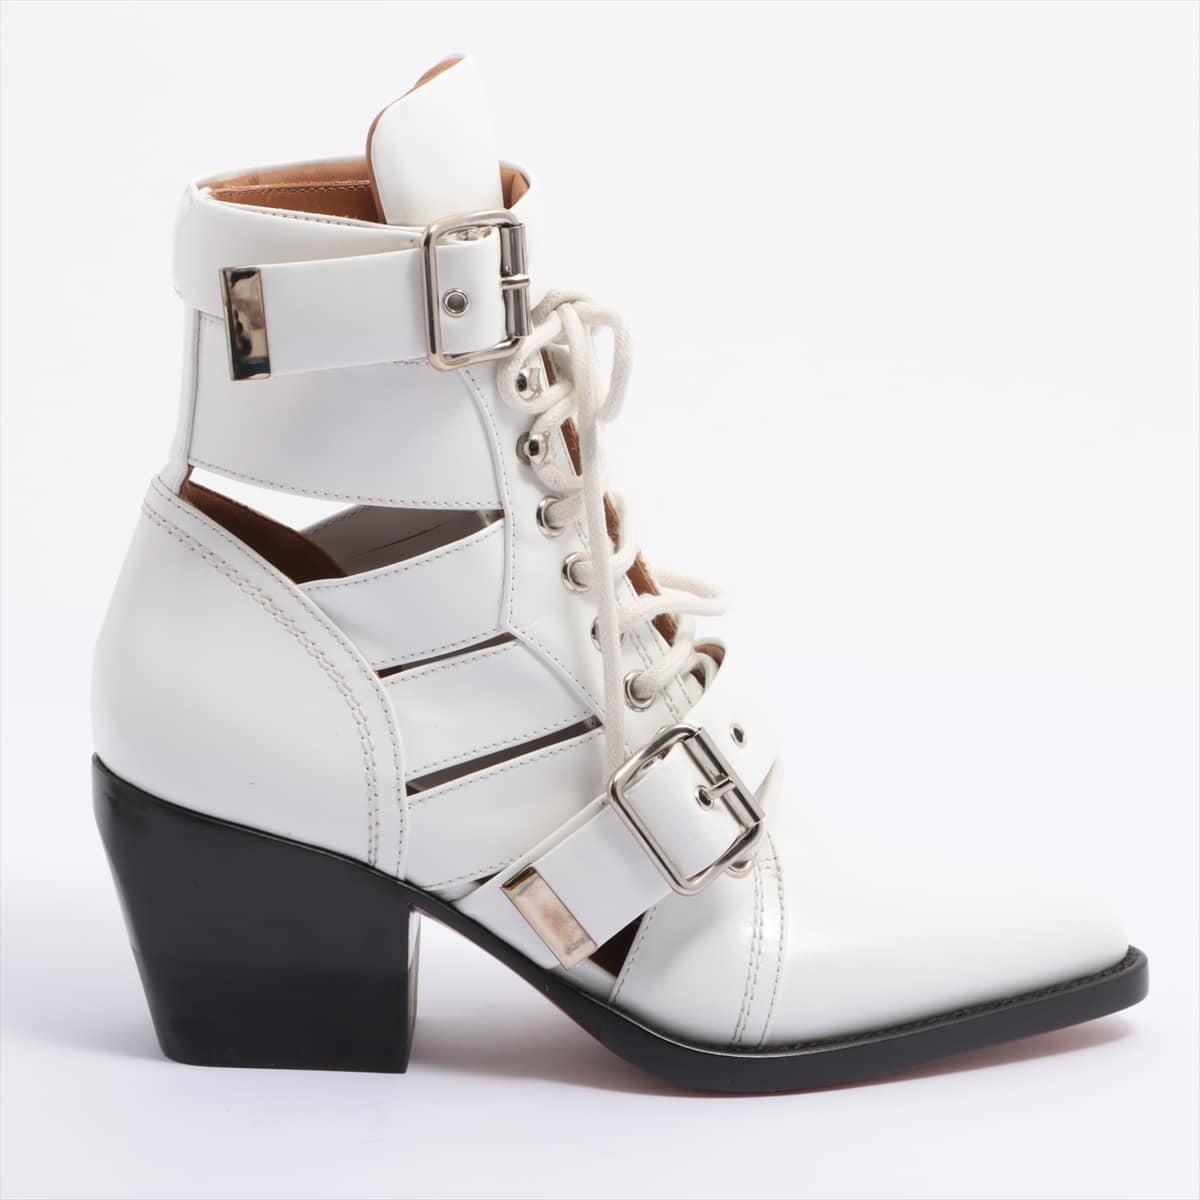 Chloe RYLEE Leather Boots 35.5 Ladies' White